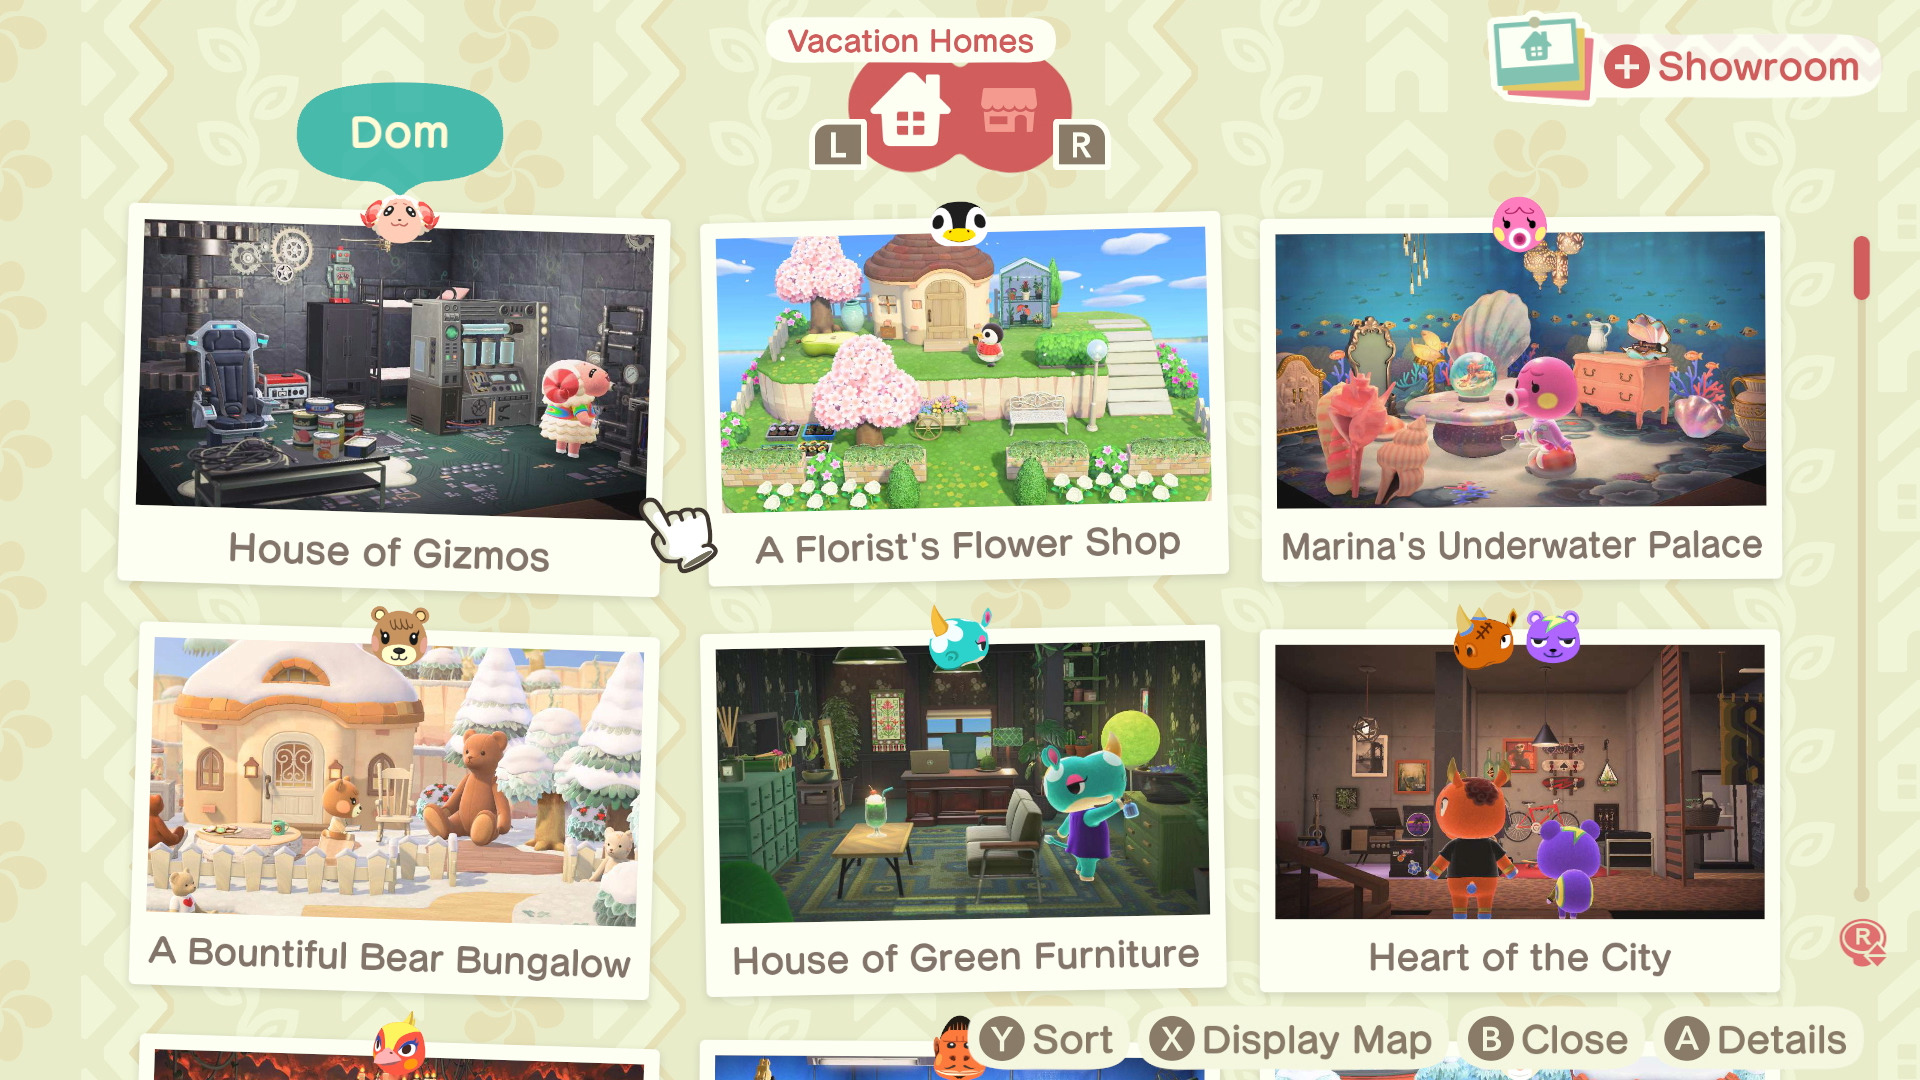 https://www.digitaltrends.com/wp-content/uploads/2021/11/animal-crossing-happy-home-paradise-request-select-screen.jpg?fit=720%2C720&p=1